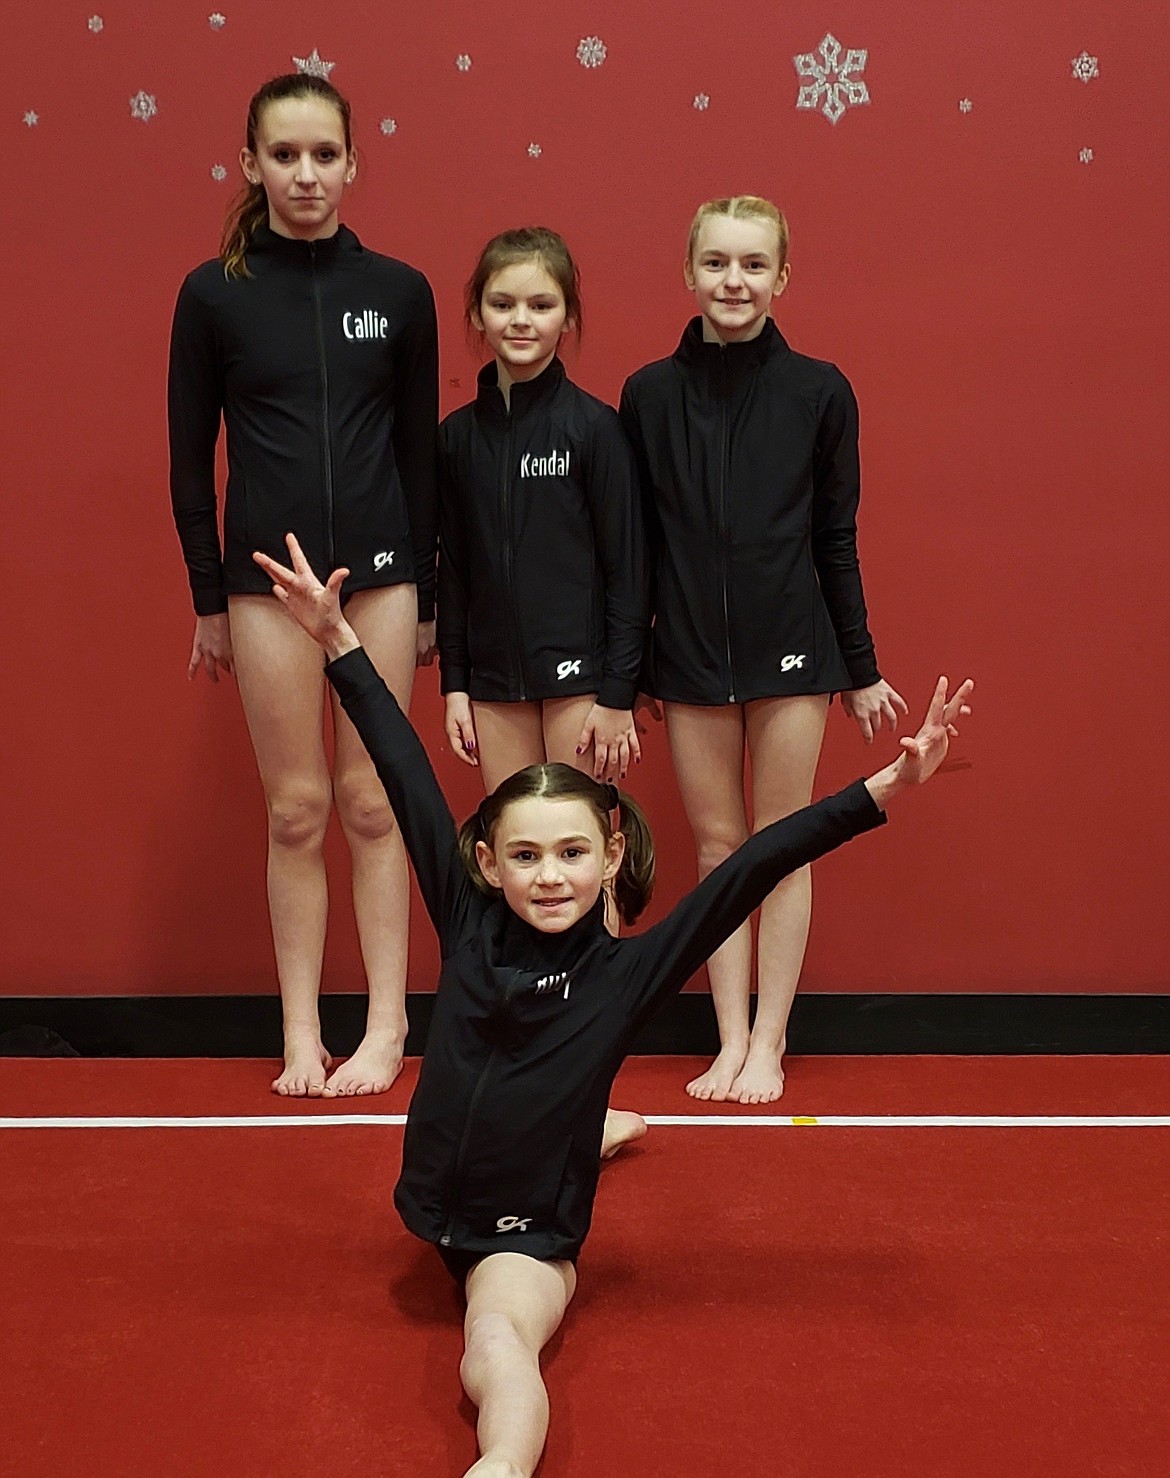 The Silver Valley Gymnastics Silver Team. Pictured are Callie Clark, Kendal Allen, Kora Foust, and in front is Ruby Brucick (in splits).